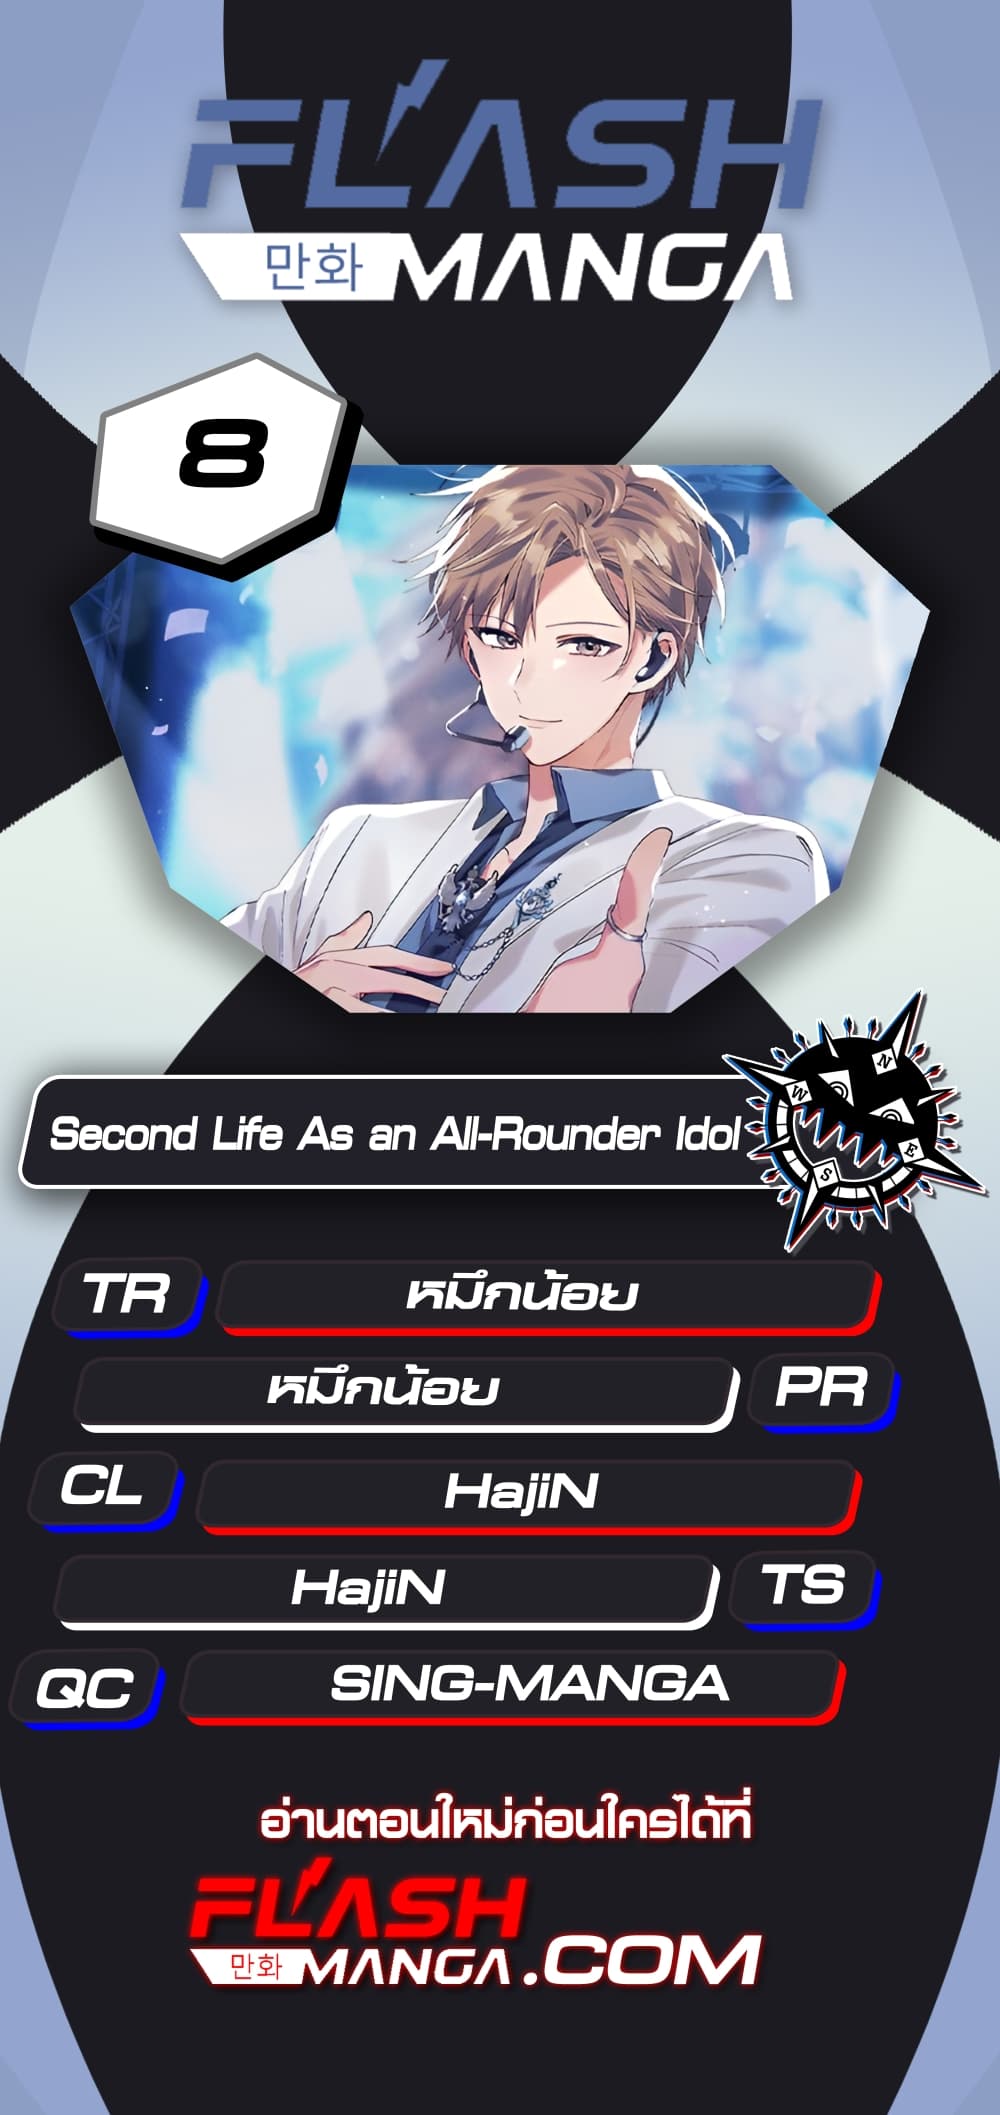 The Second Life of an All-Rounder Idol 8-8